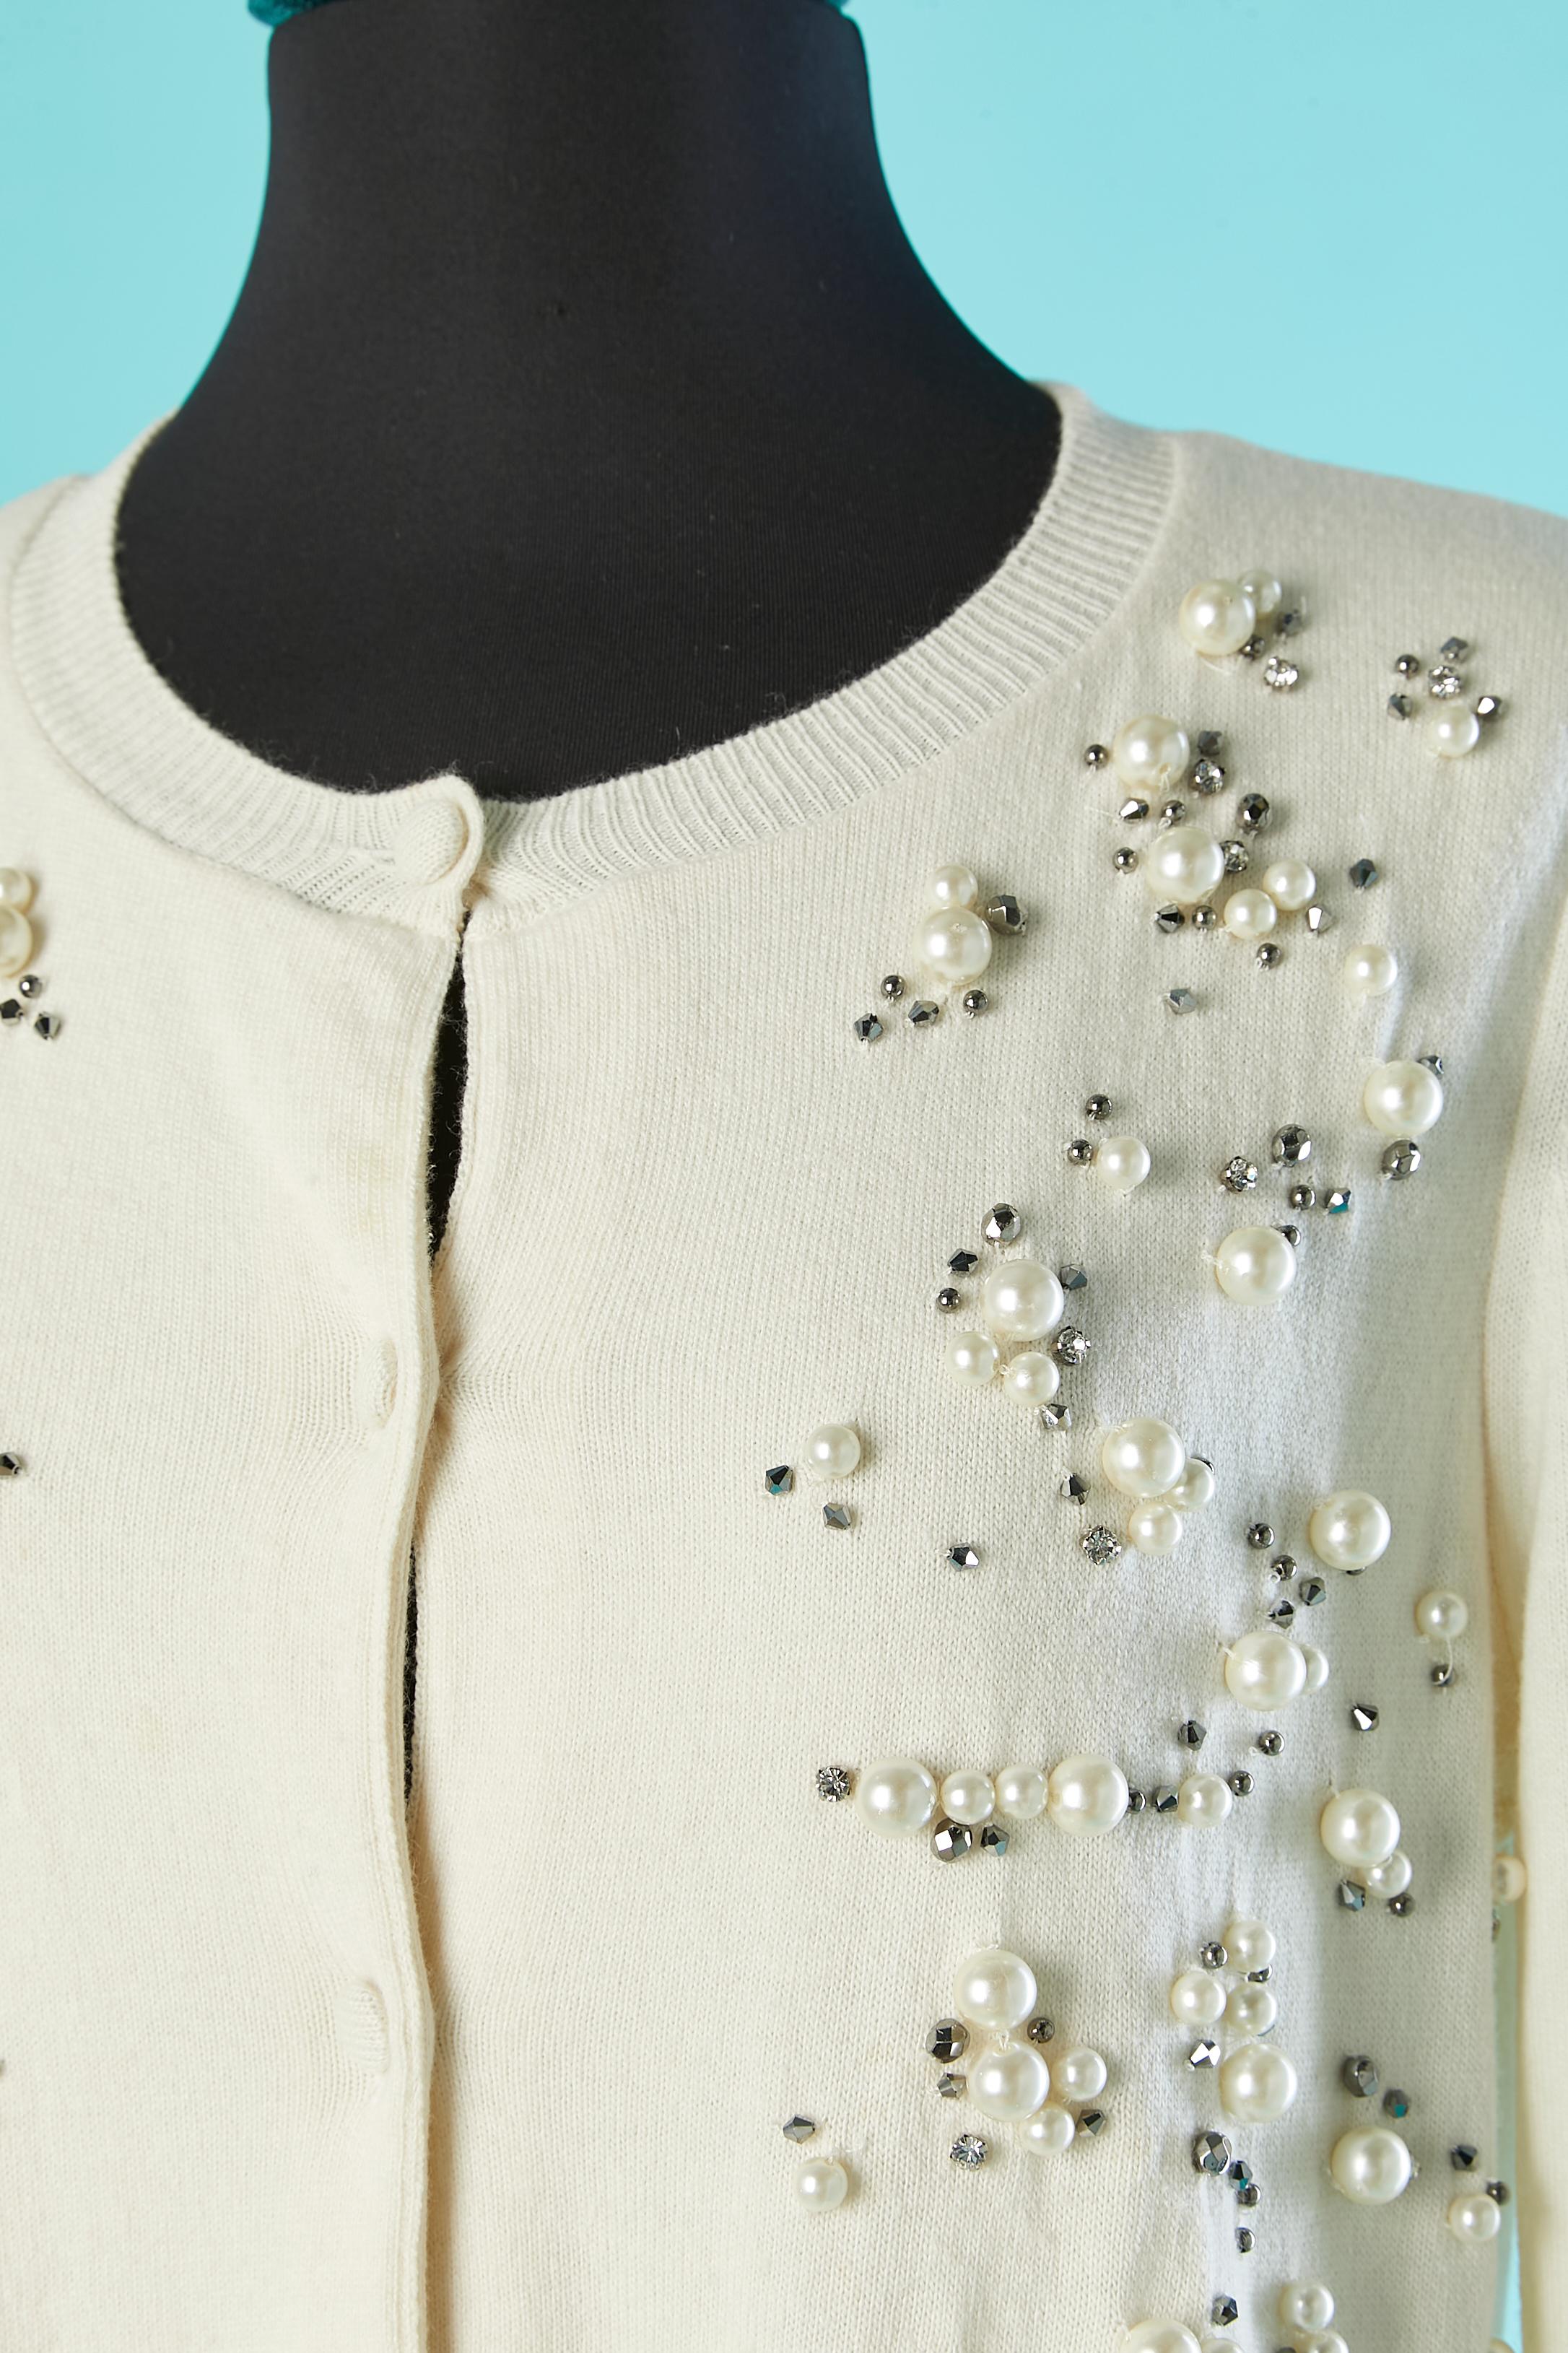 Off-white cardigan with beads and rhinestone embellishement. Knit composition: 40% wool, 30% rayon, 20% polyamide, 10% cashmere. 
Buttons are covered with the same knit. 
Size M 